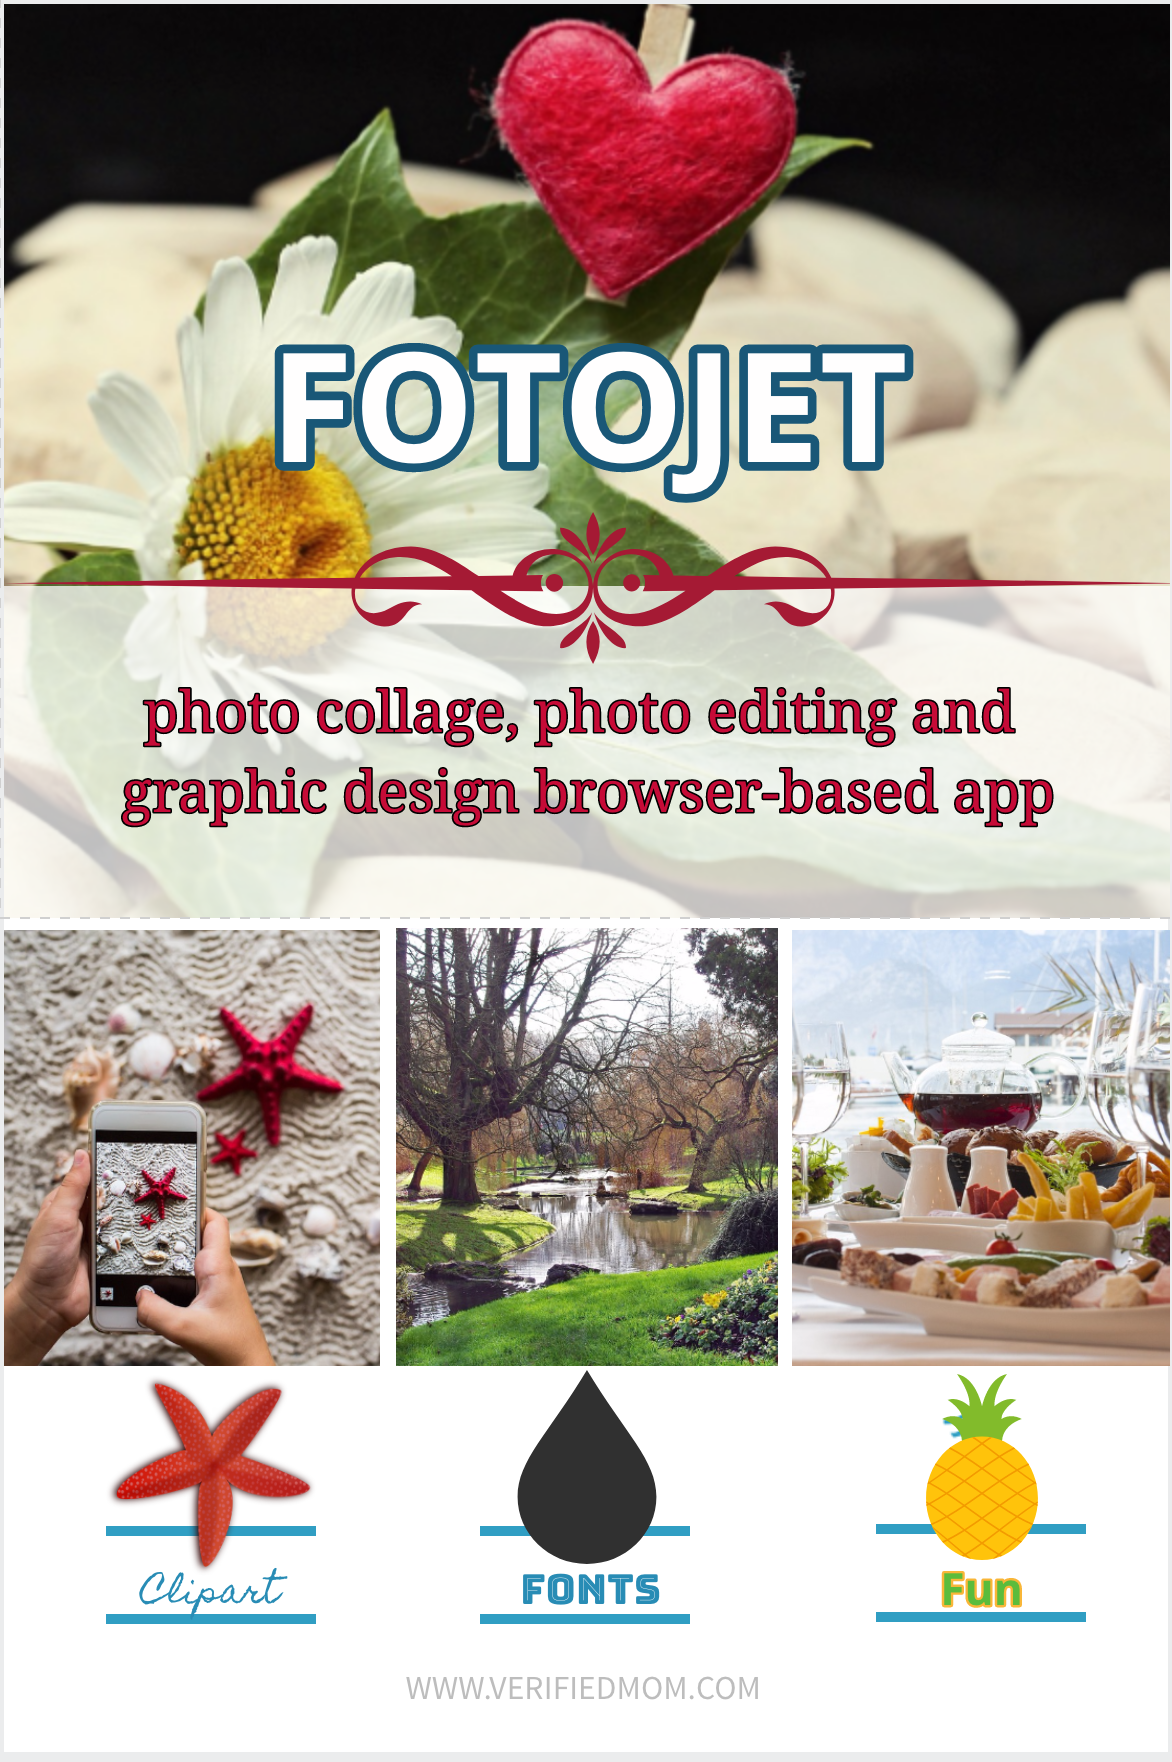 FotoJet Featured Image